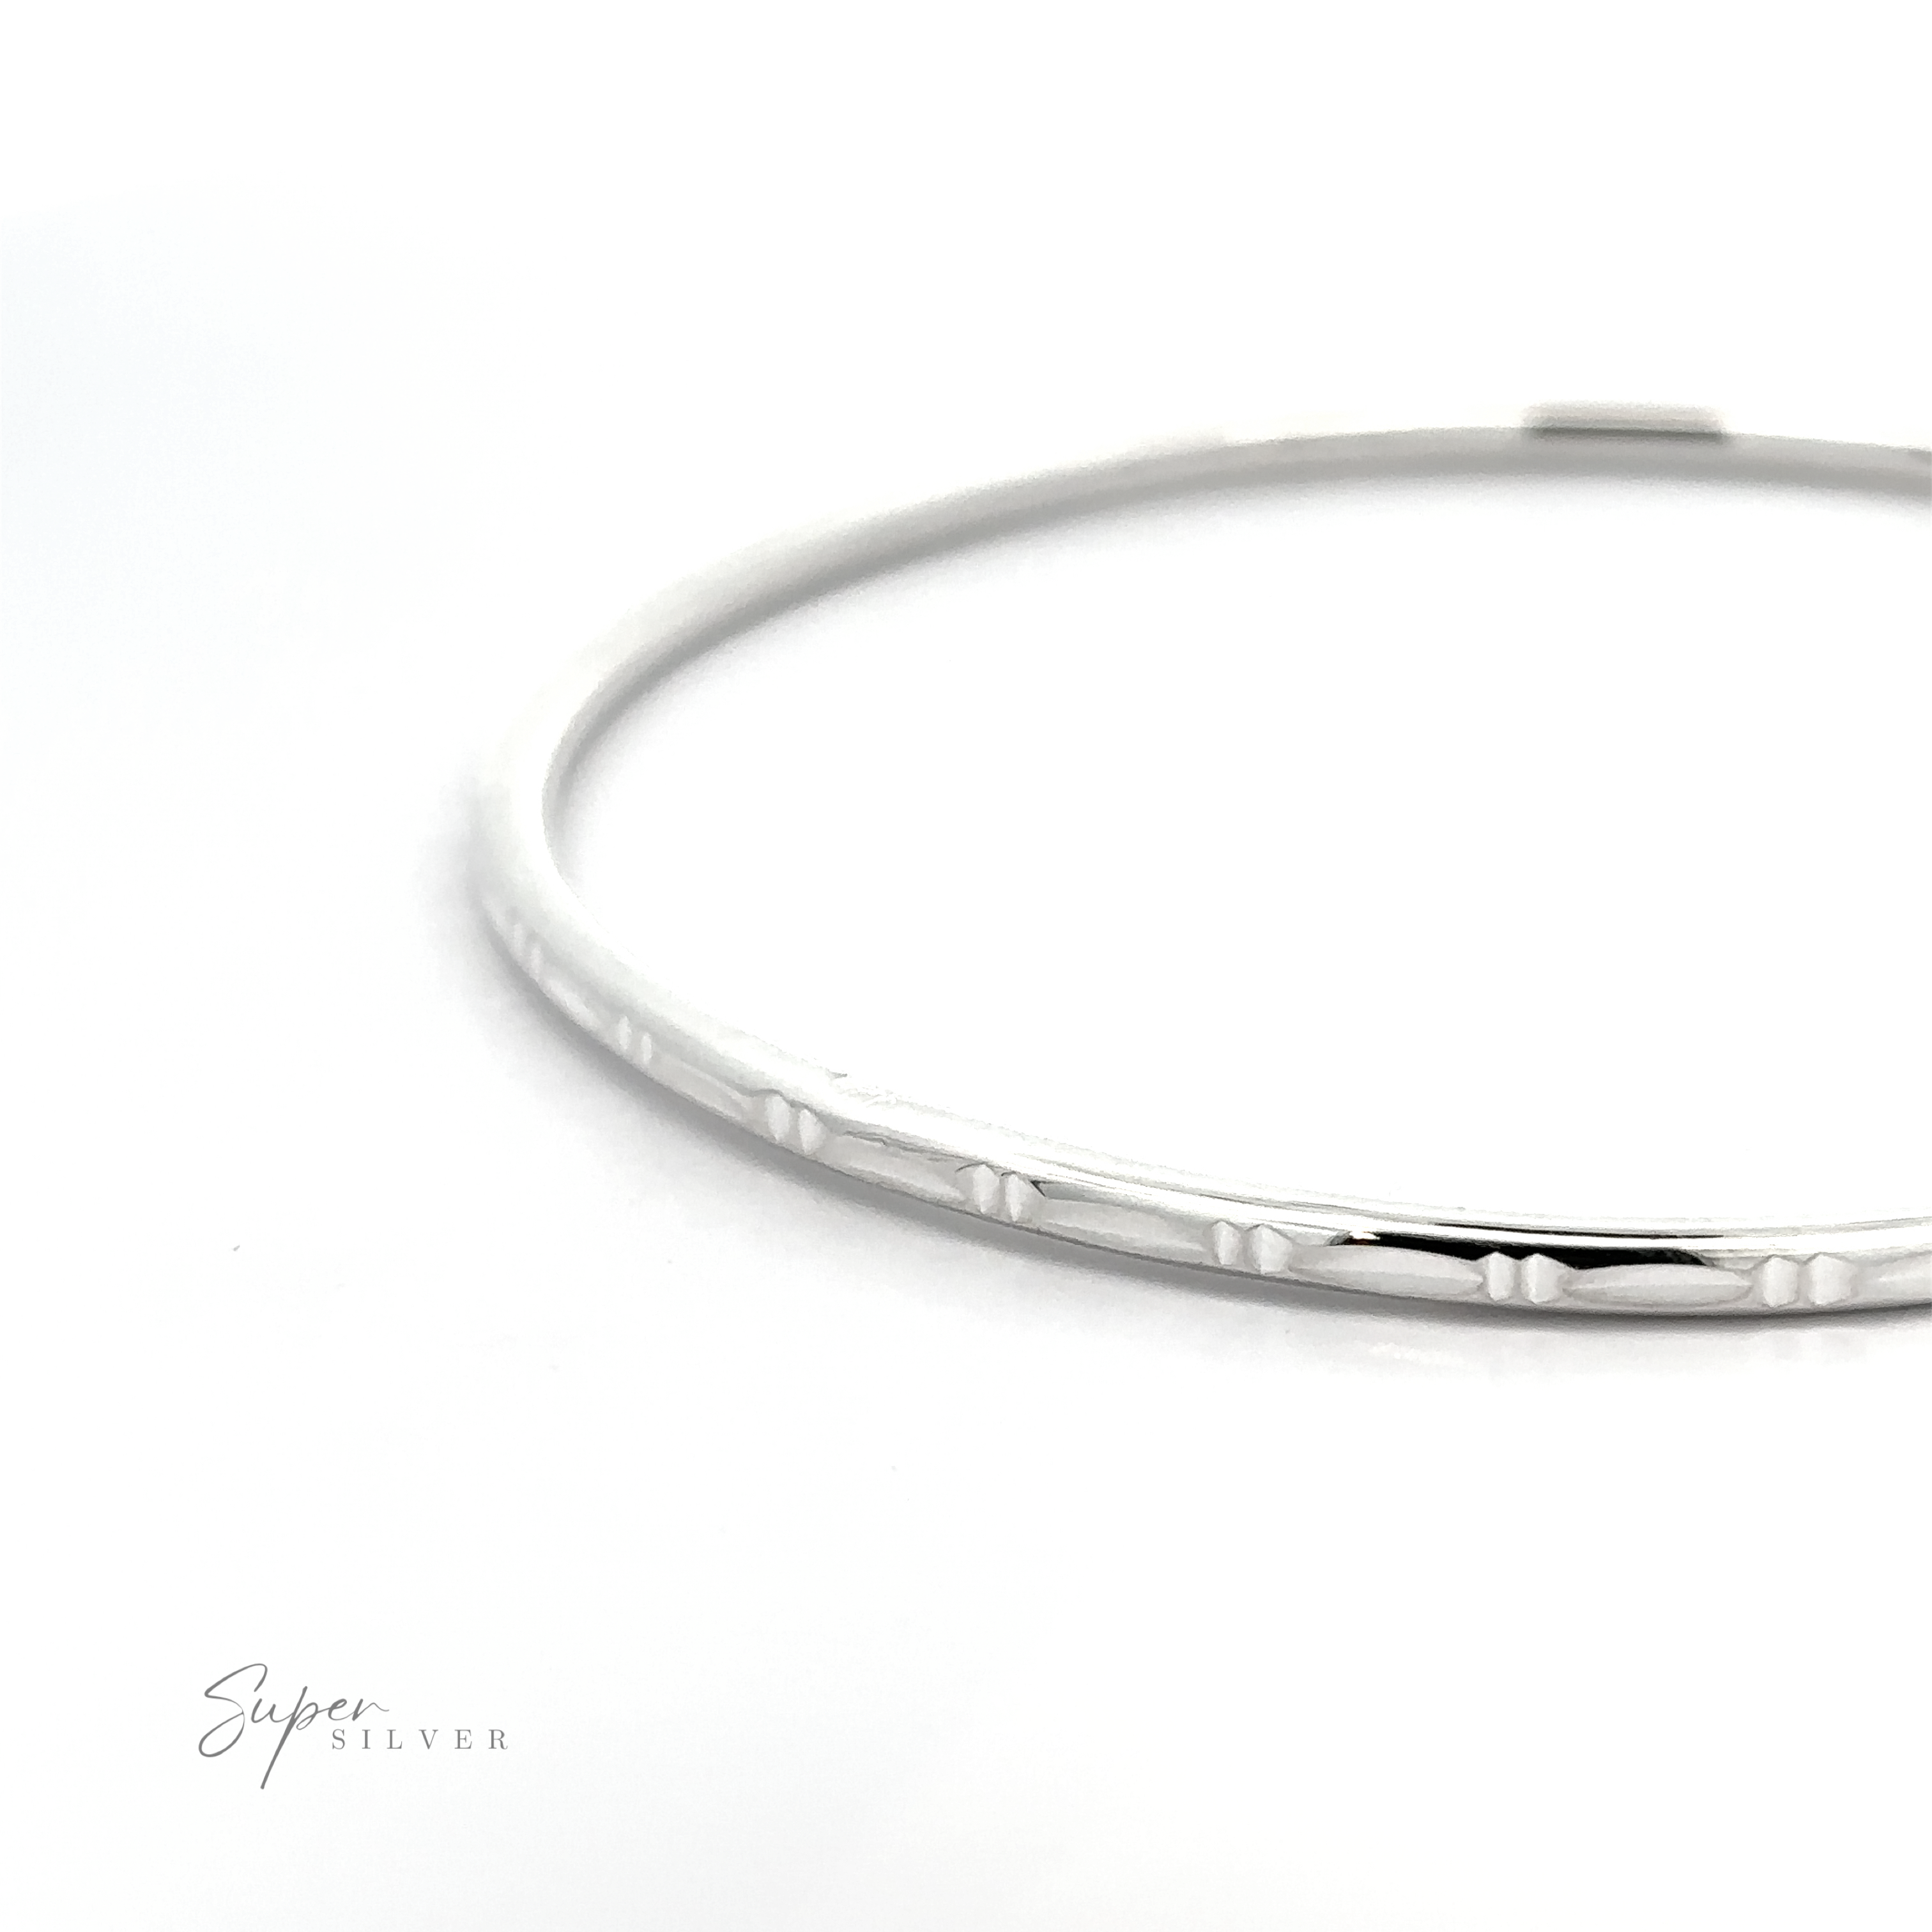 Silver Bangle Bracelet with Faceted Cut